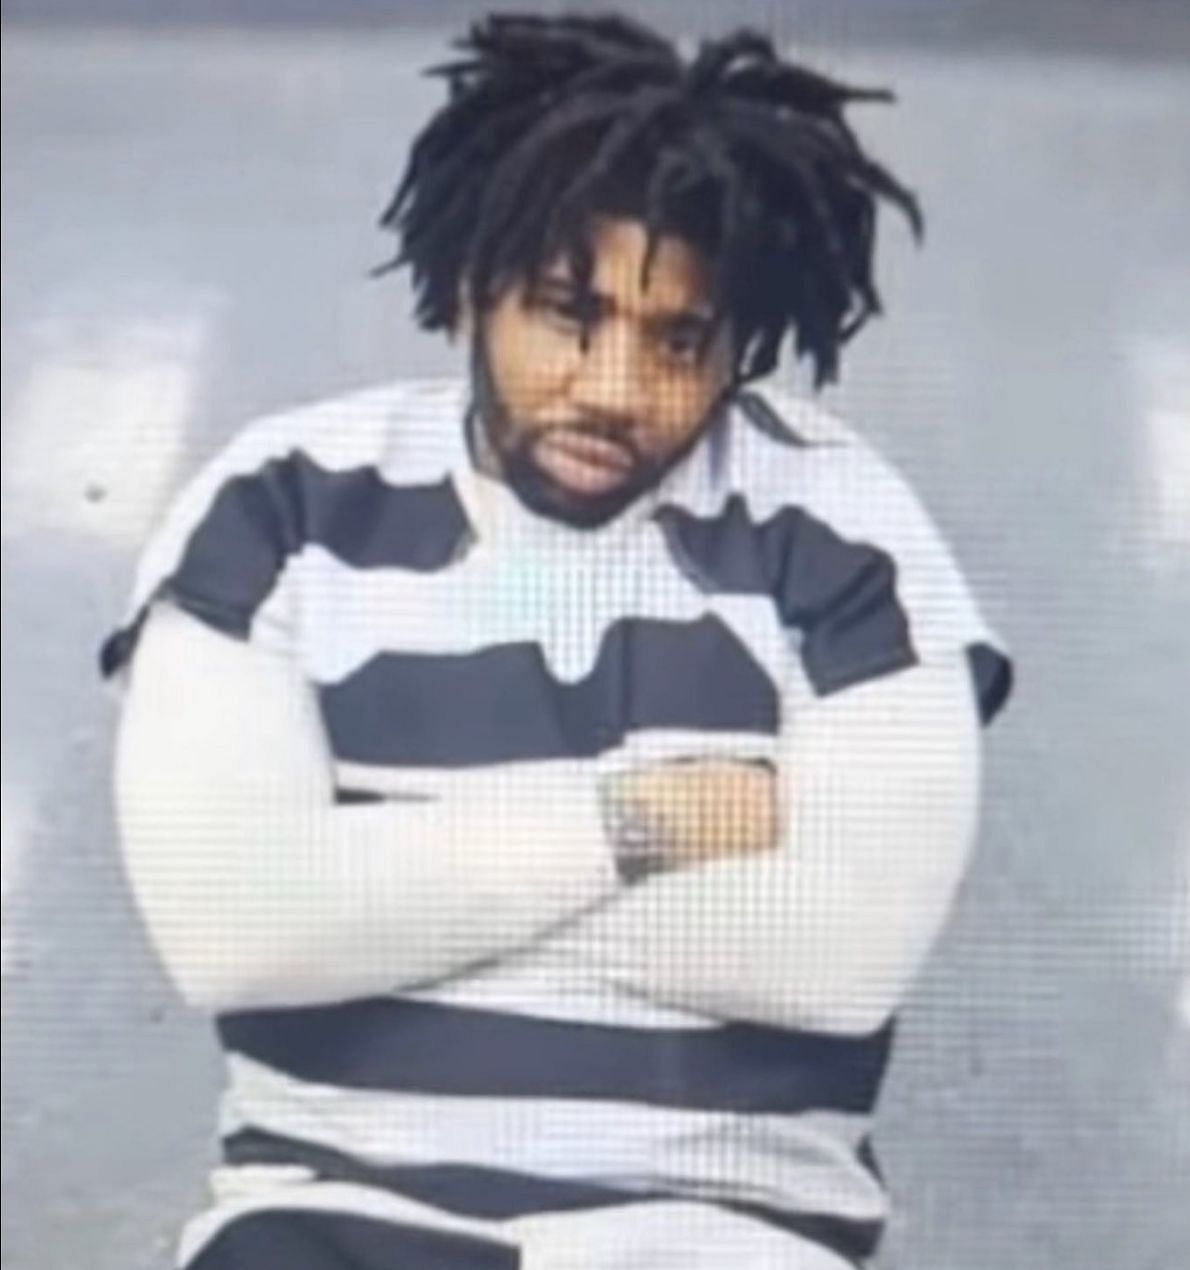 Social media users in a frenzy after image of the rapper from inside the prison goes viral on the internet. (Image via Twitter)